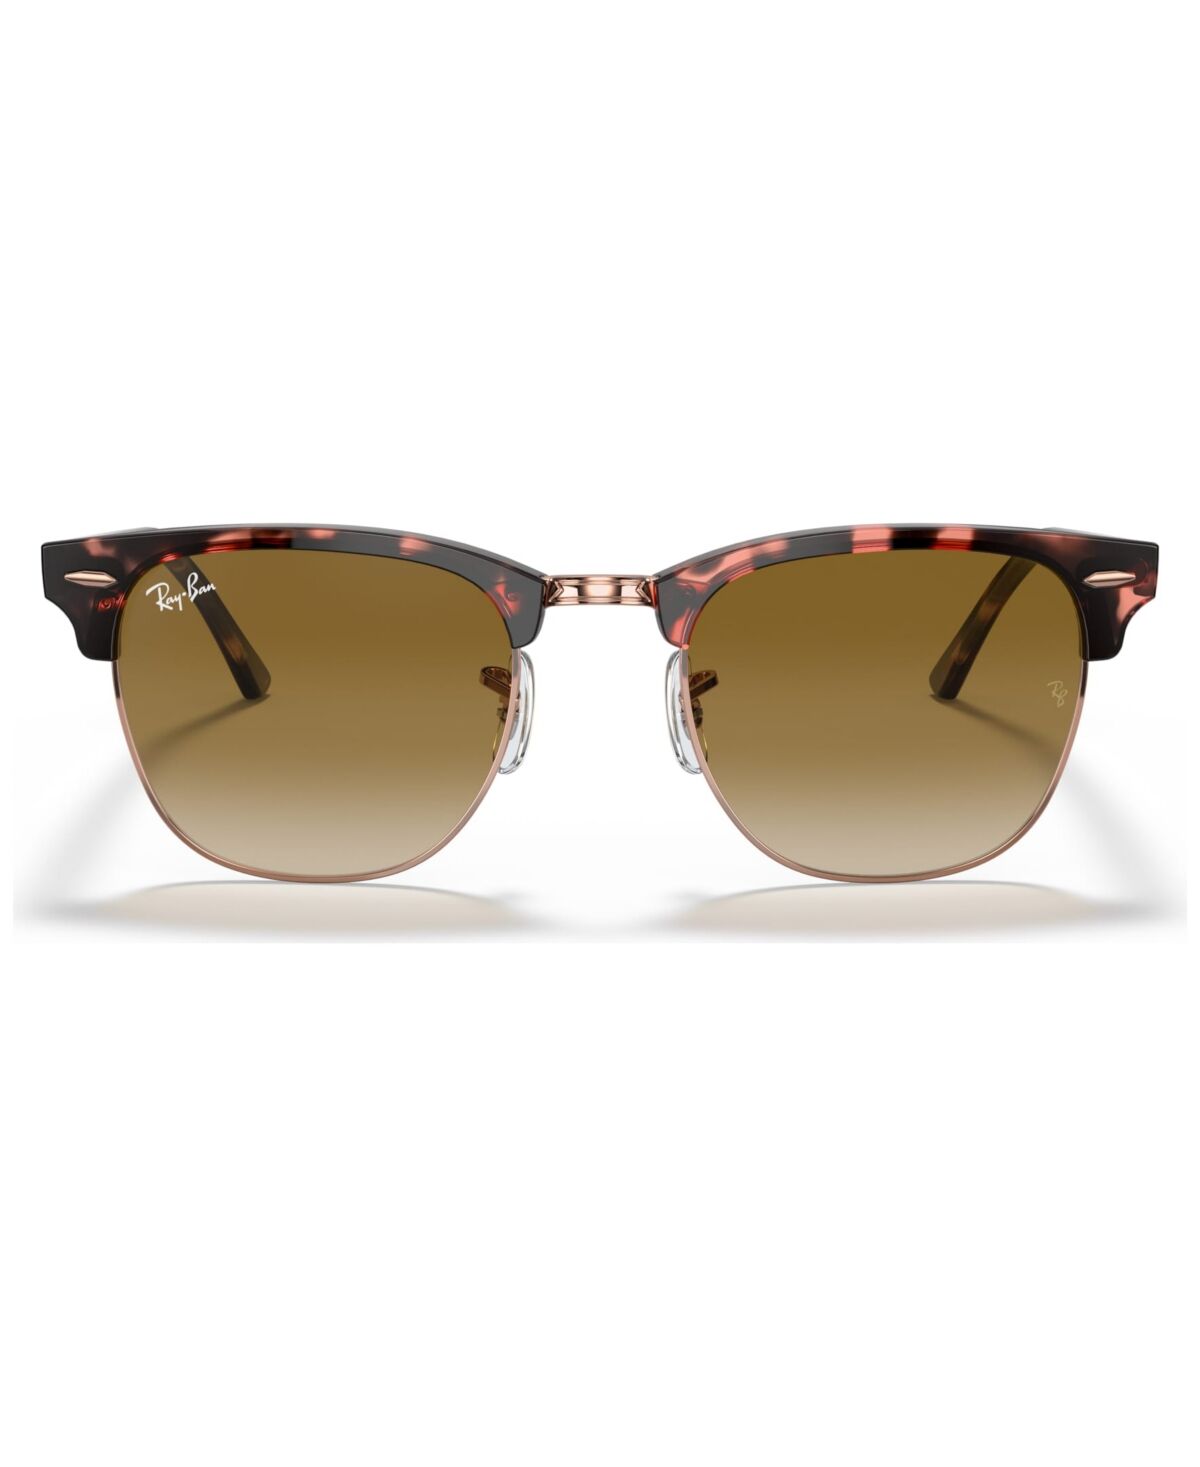 Ray-Ban Sunglasses, Clubmaster Fleck RB3016 - PINK HAVANA/CLEAR GRADIENT BROWN